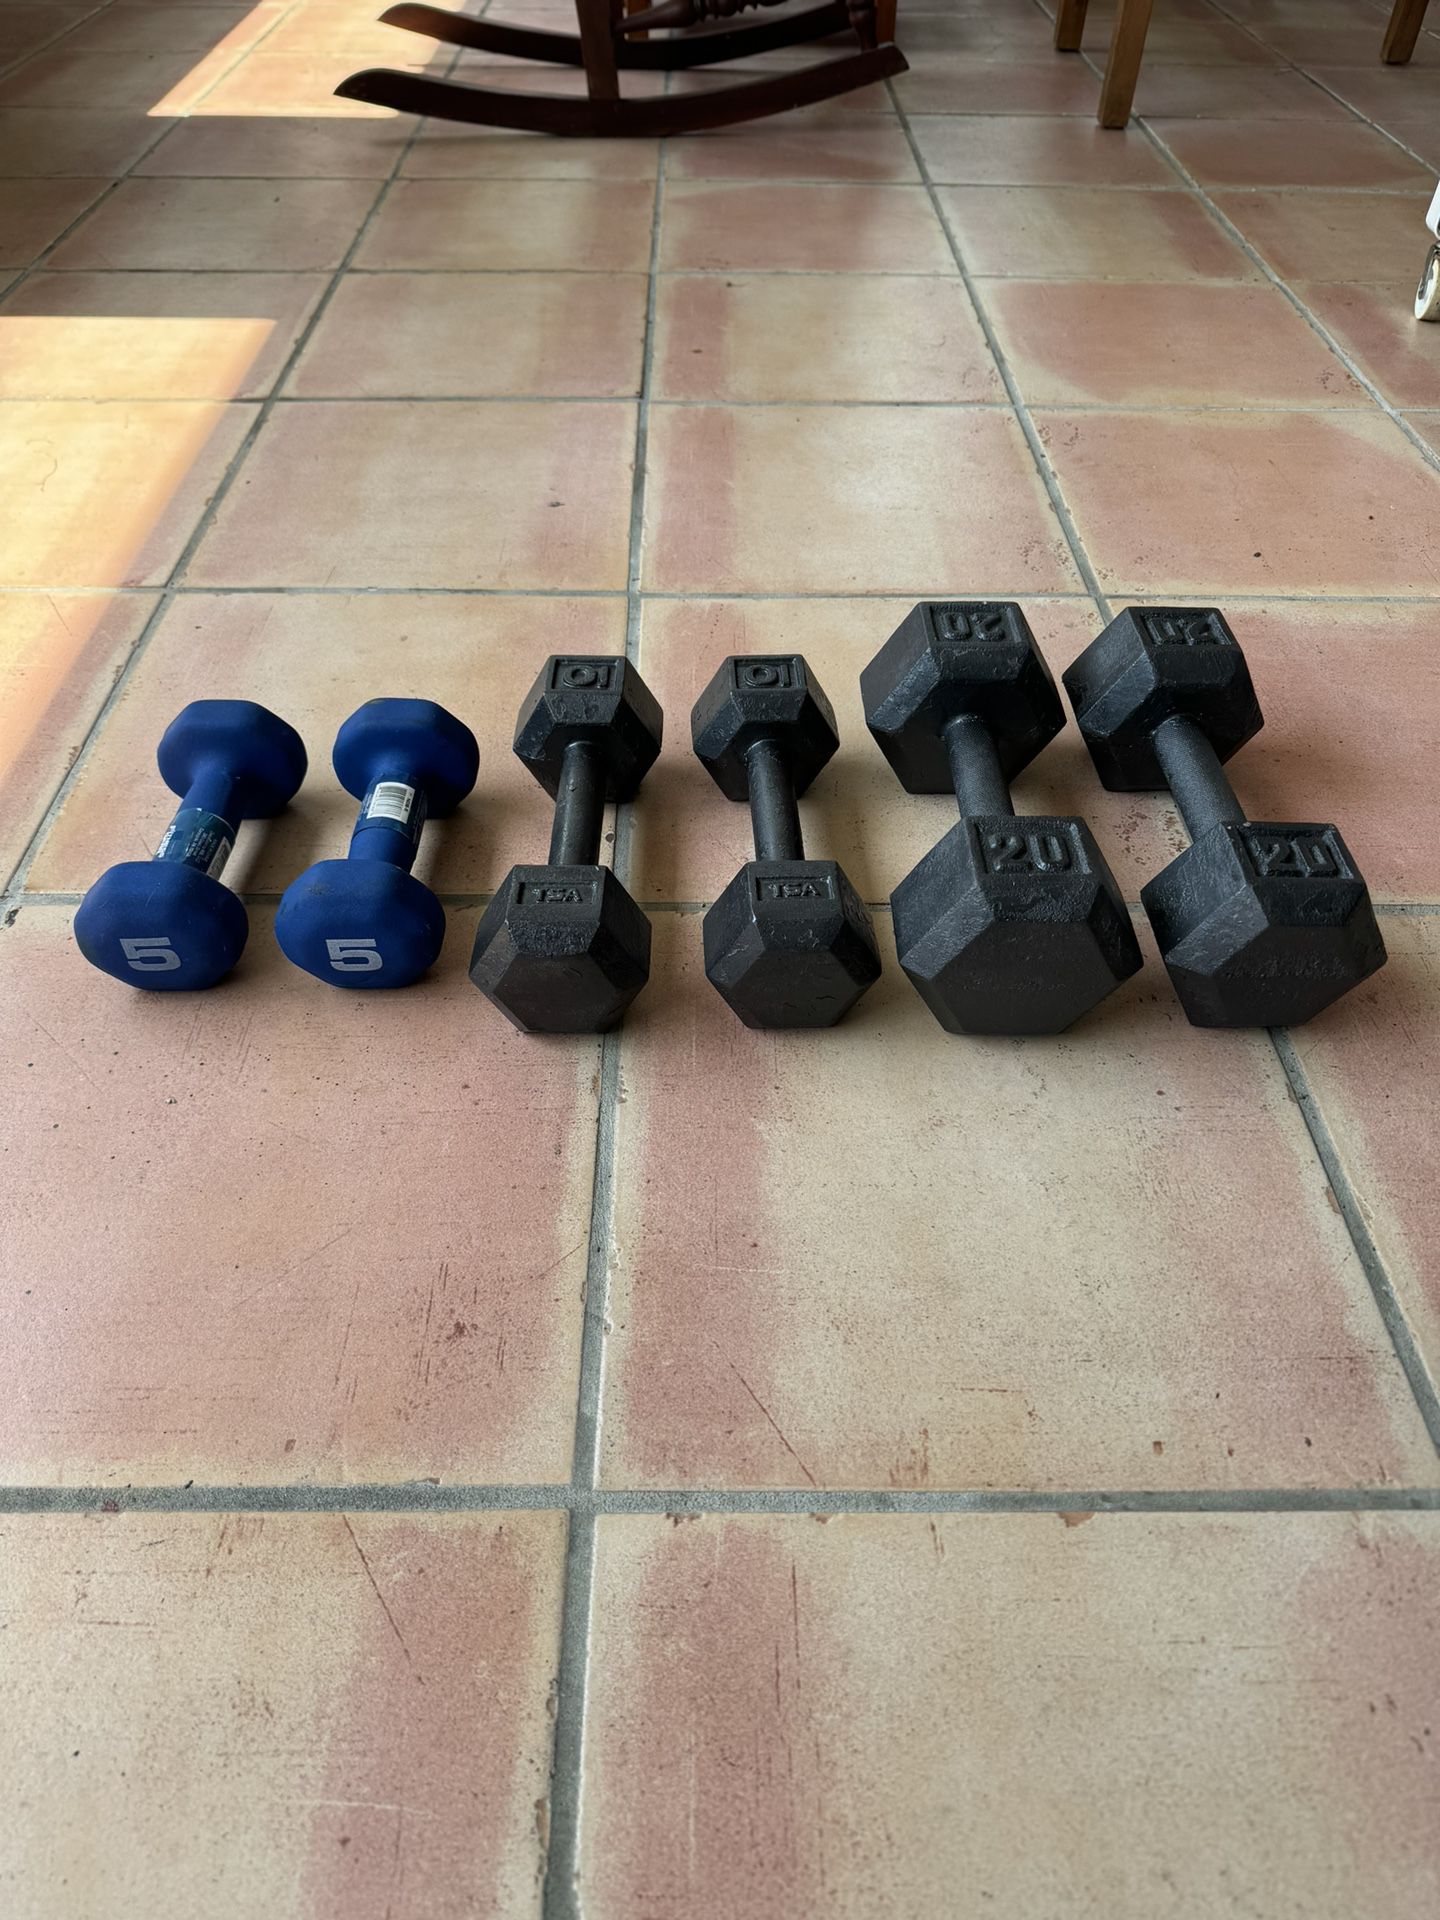 Three Sets Of Dumbbells, 20 lbs, 10 lbs, and 5 lbs